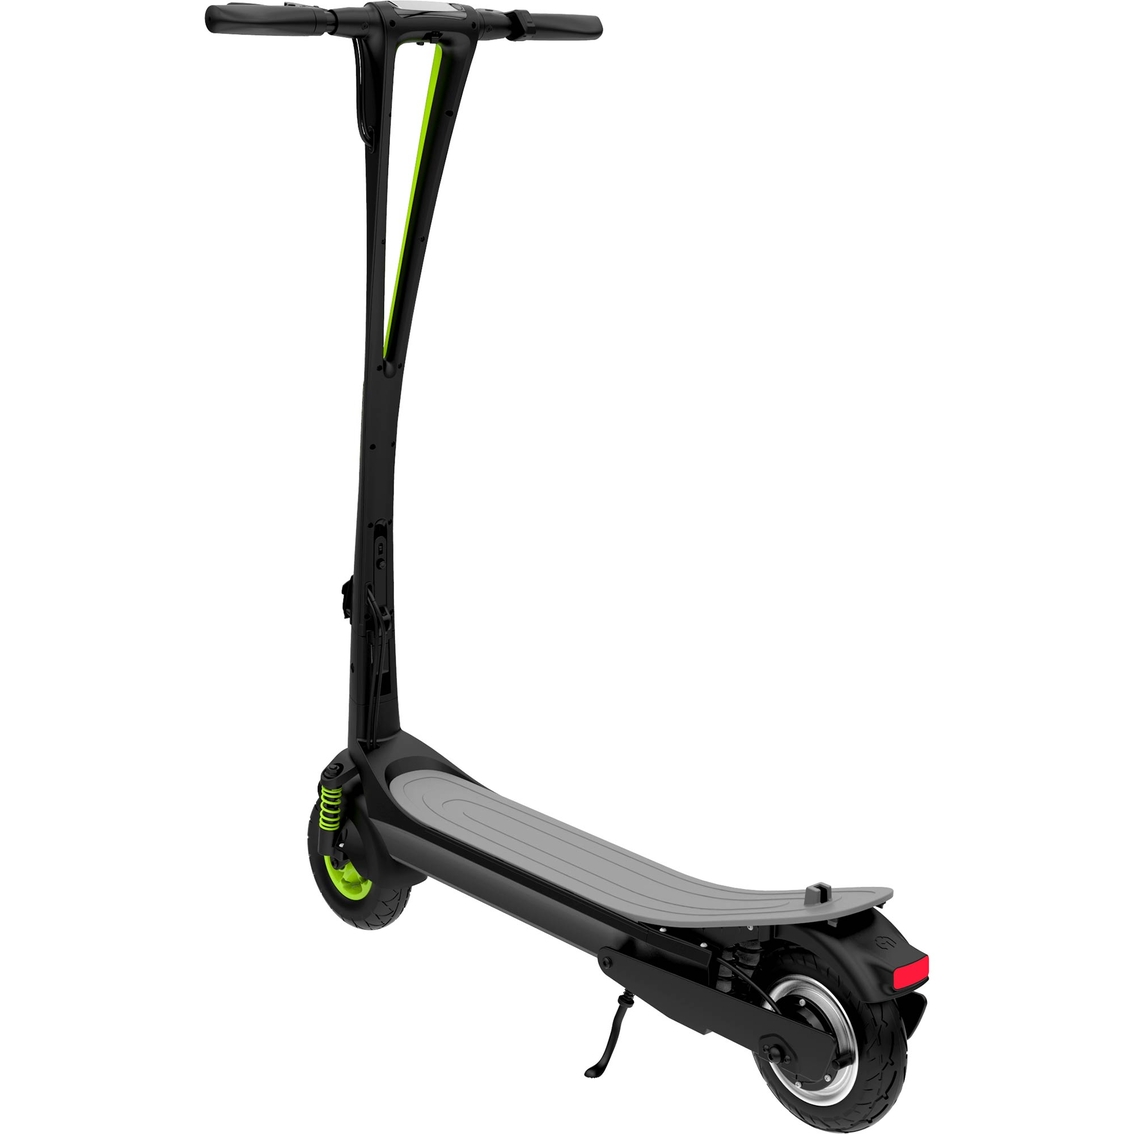 Inmotion L6 Electric Scooter with Cruise Control - Image 2 of 3